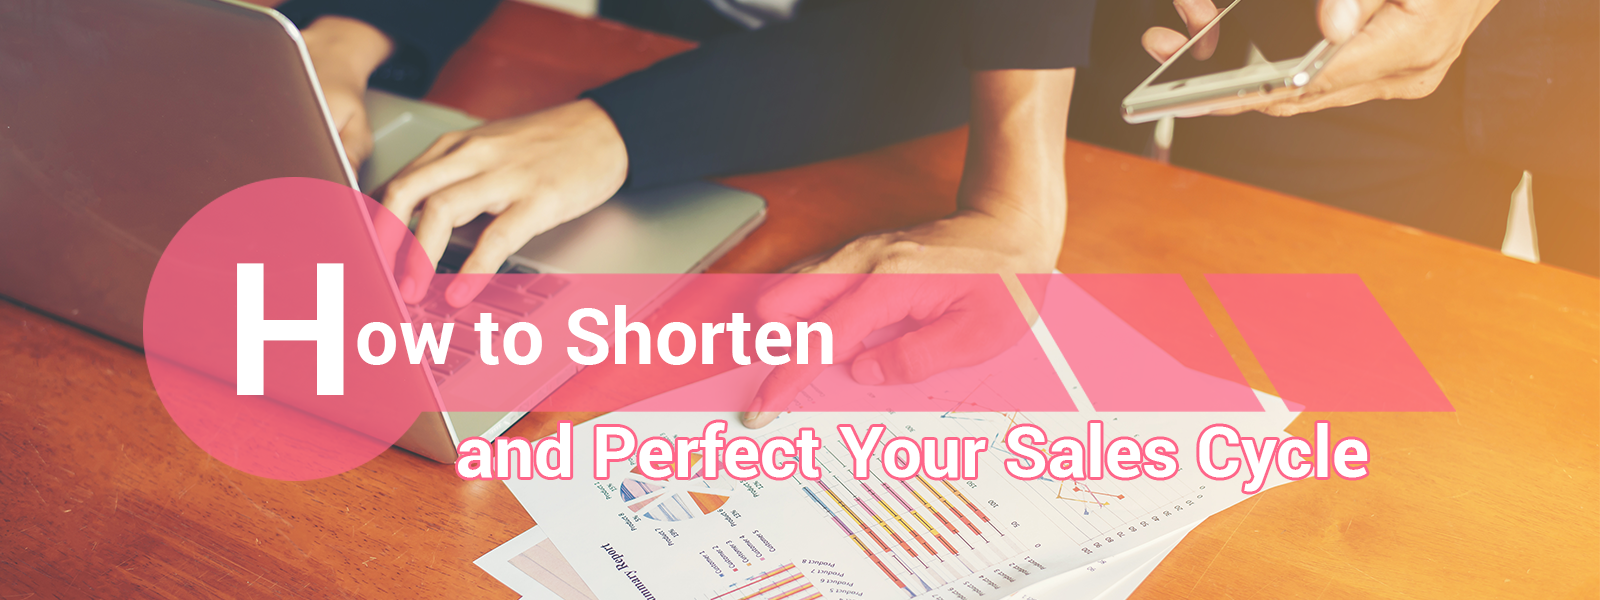 how to shorten and perfect your sales cycle